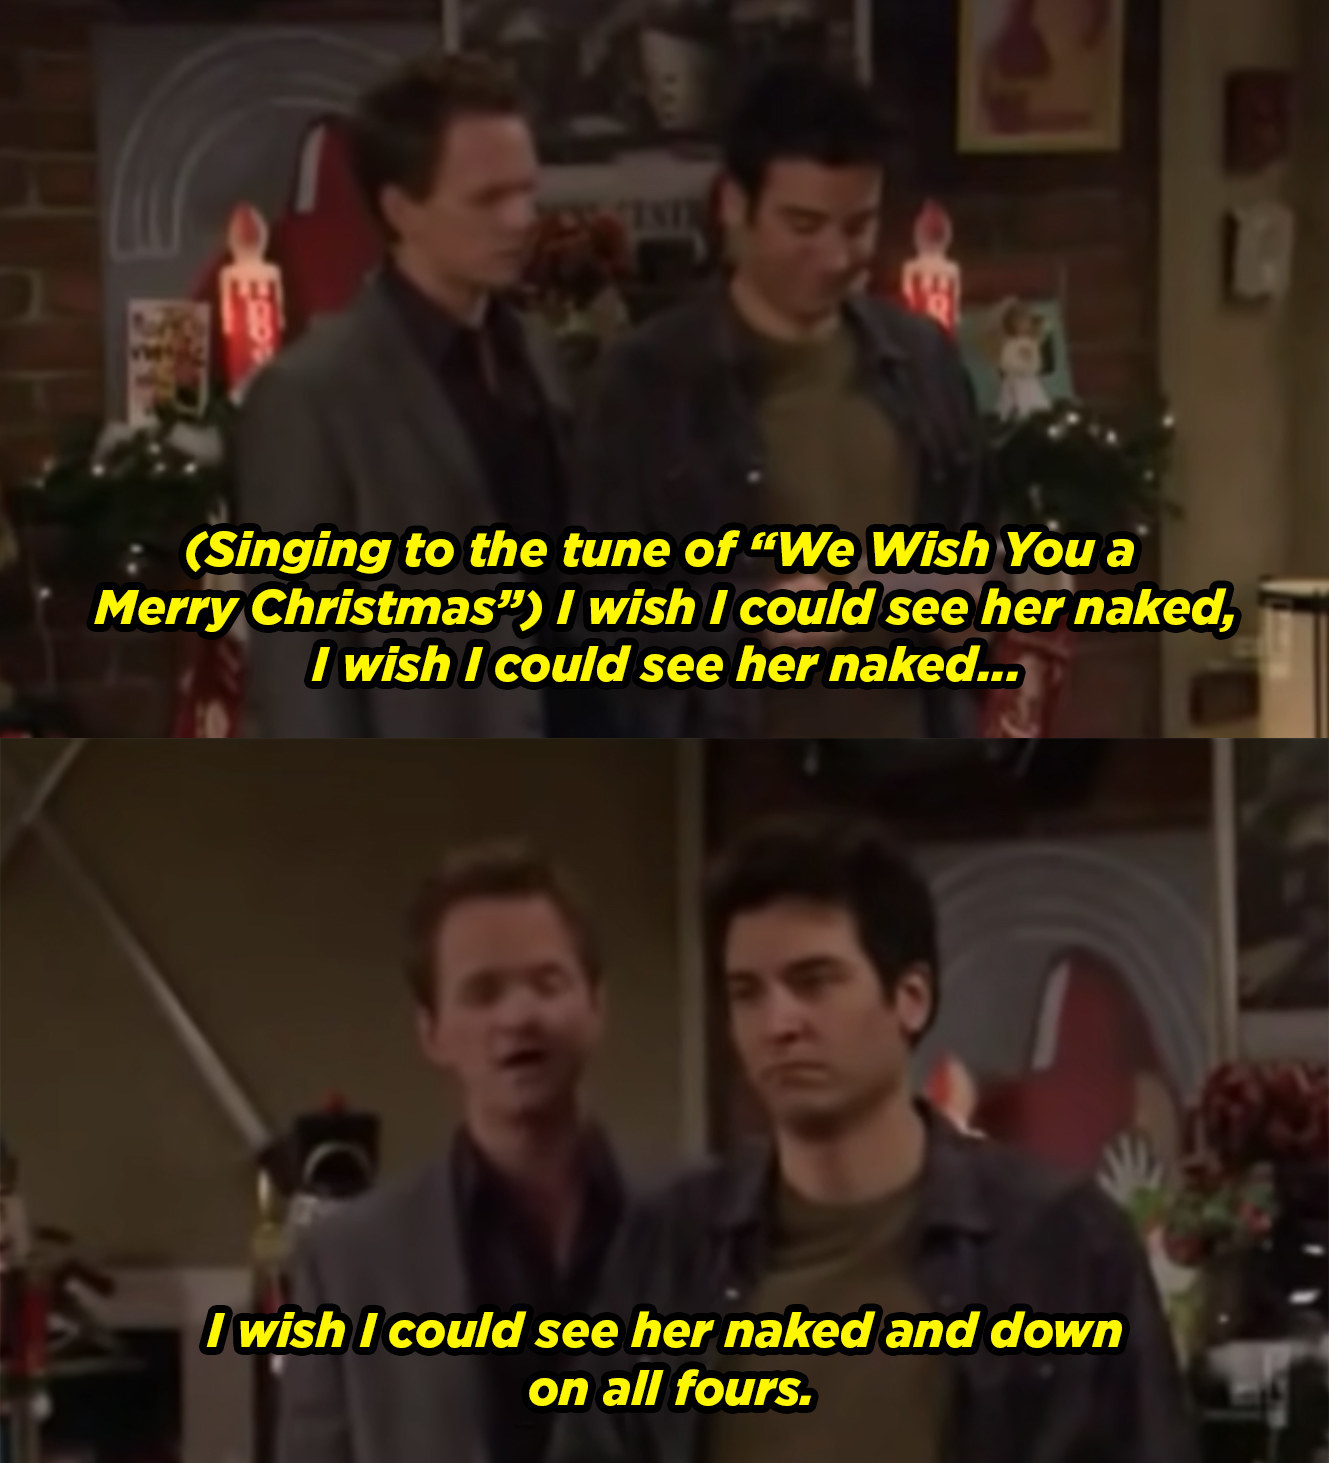 Barney sings about how he wishes he could see a woman naked and on all fours